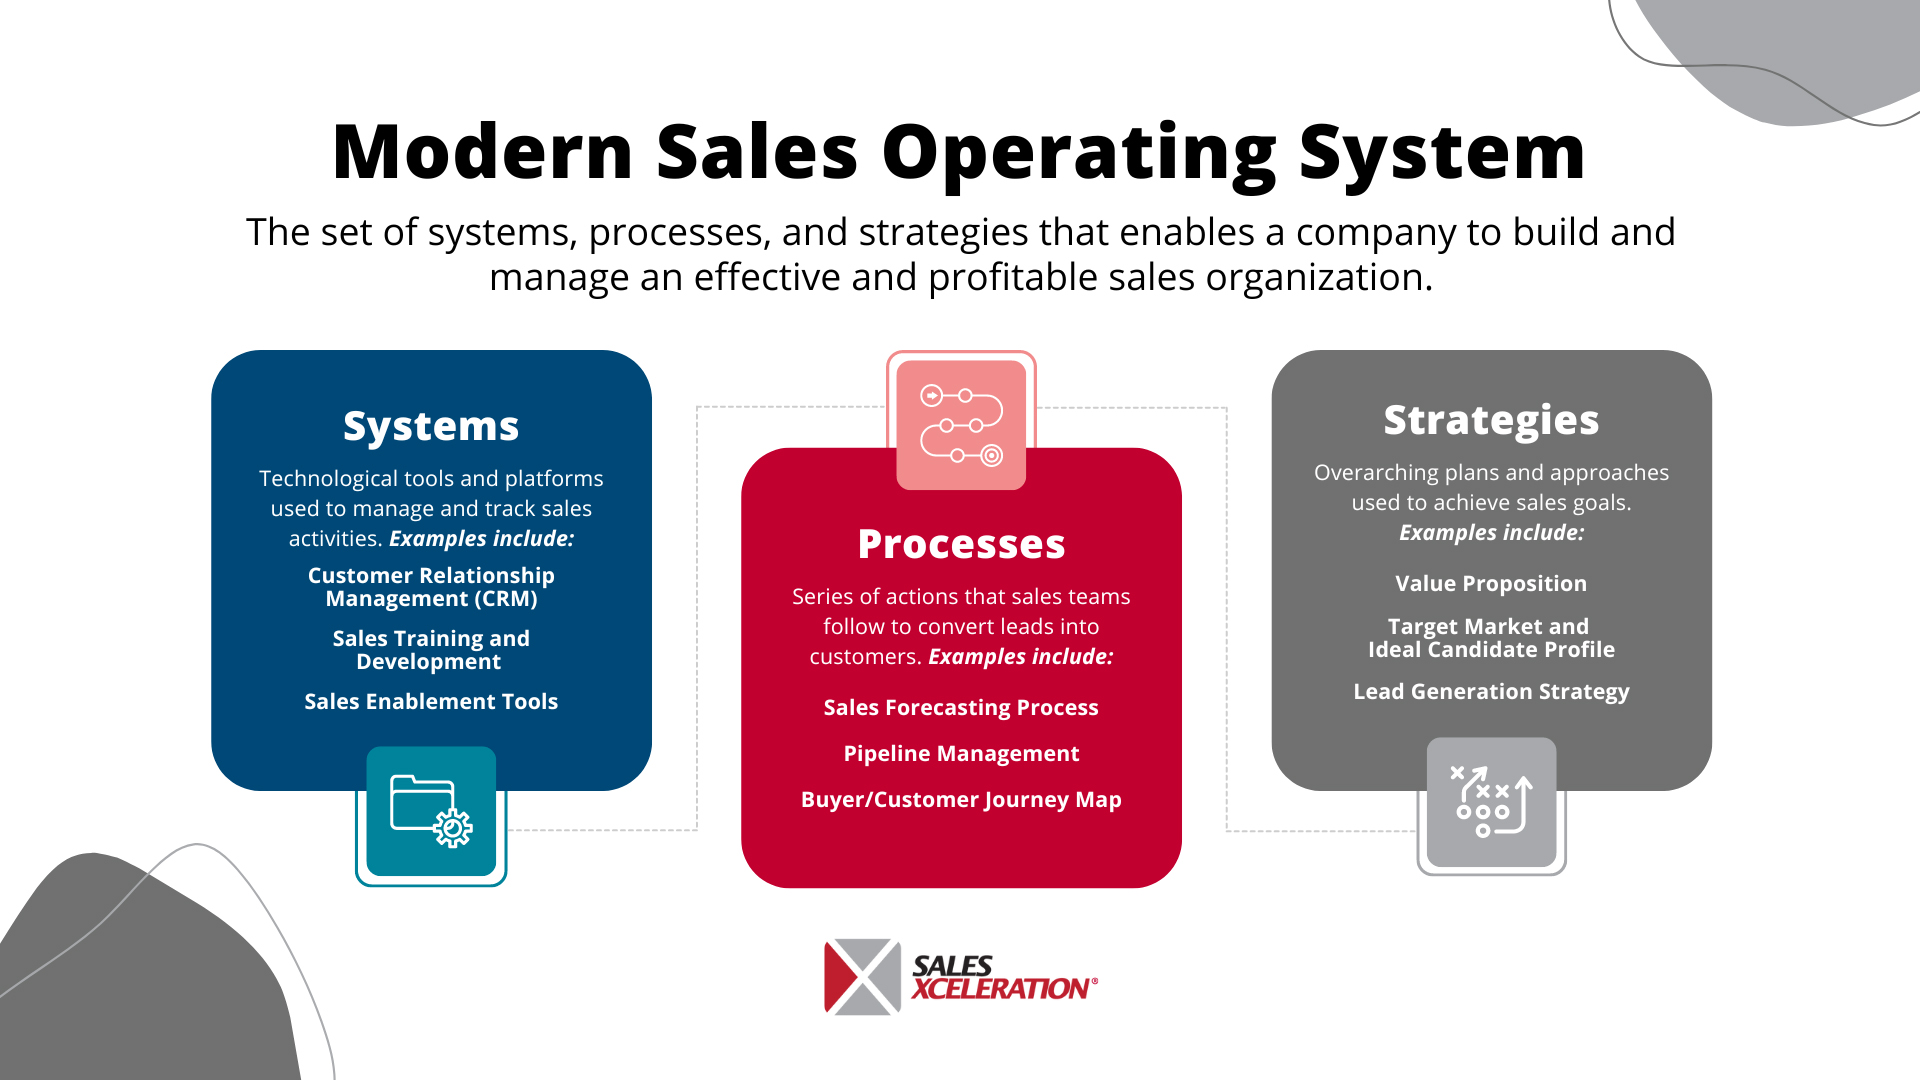 Graphic for Modern Sales Operating System including examples of the systems, tools, and processes.